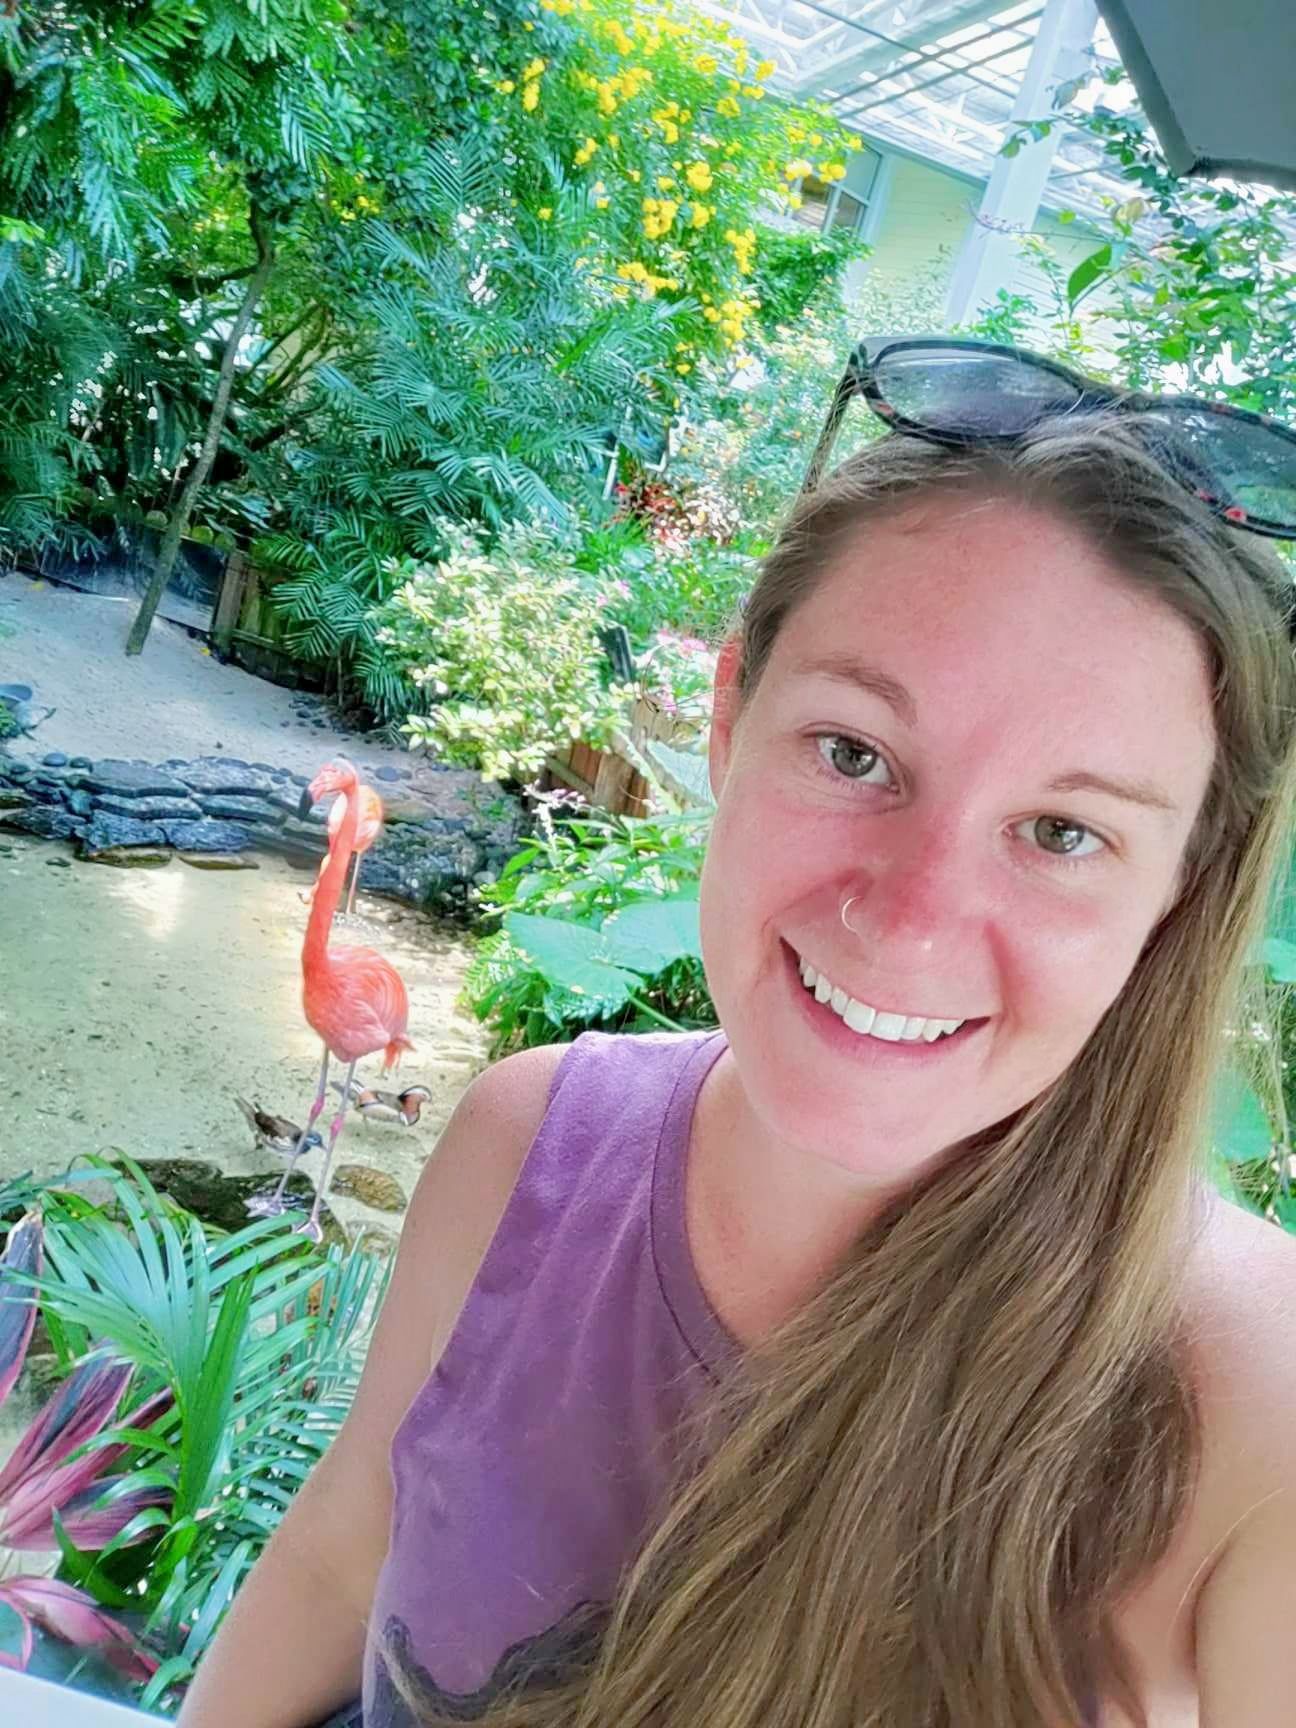 A photo of Ariel smiling with a flamingo in the background, symbolizing joy and connection to nature